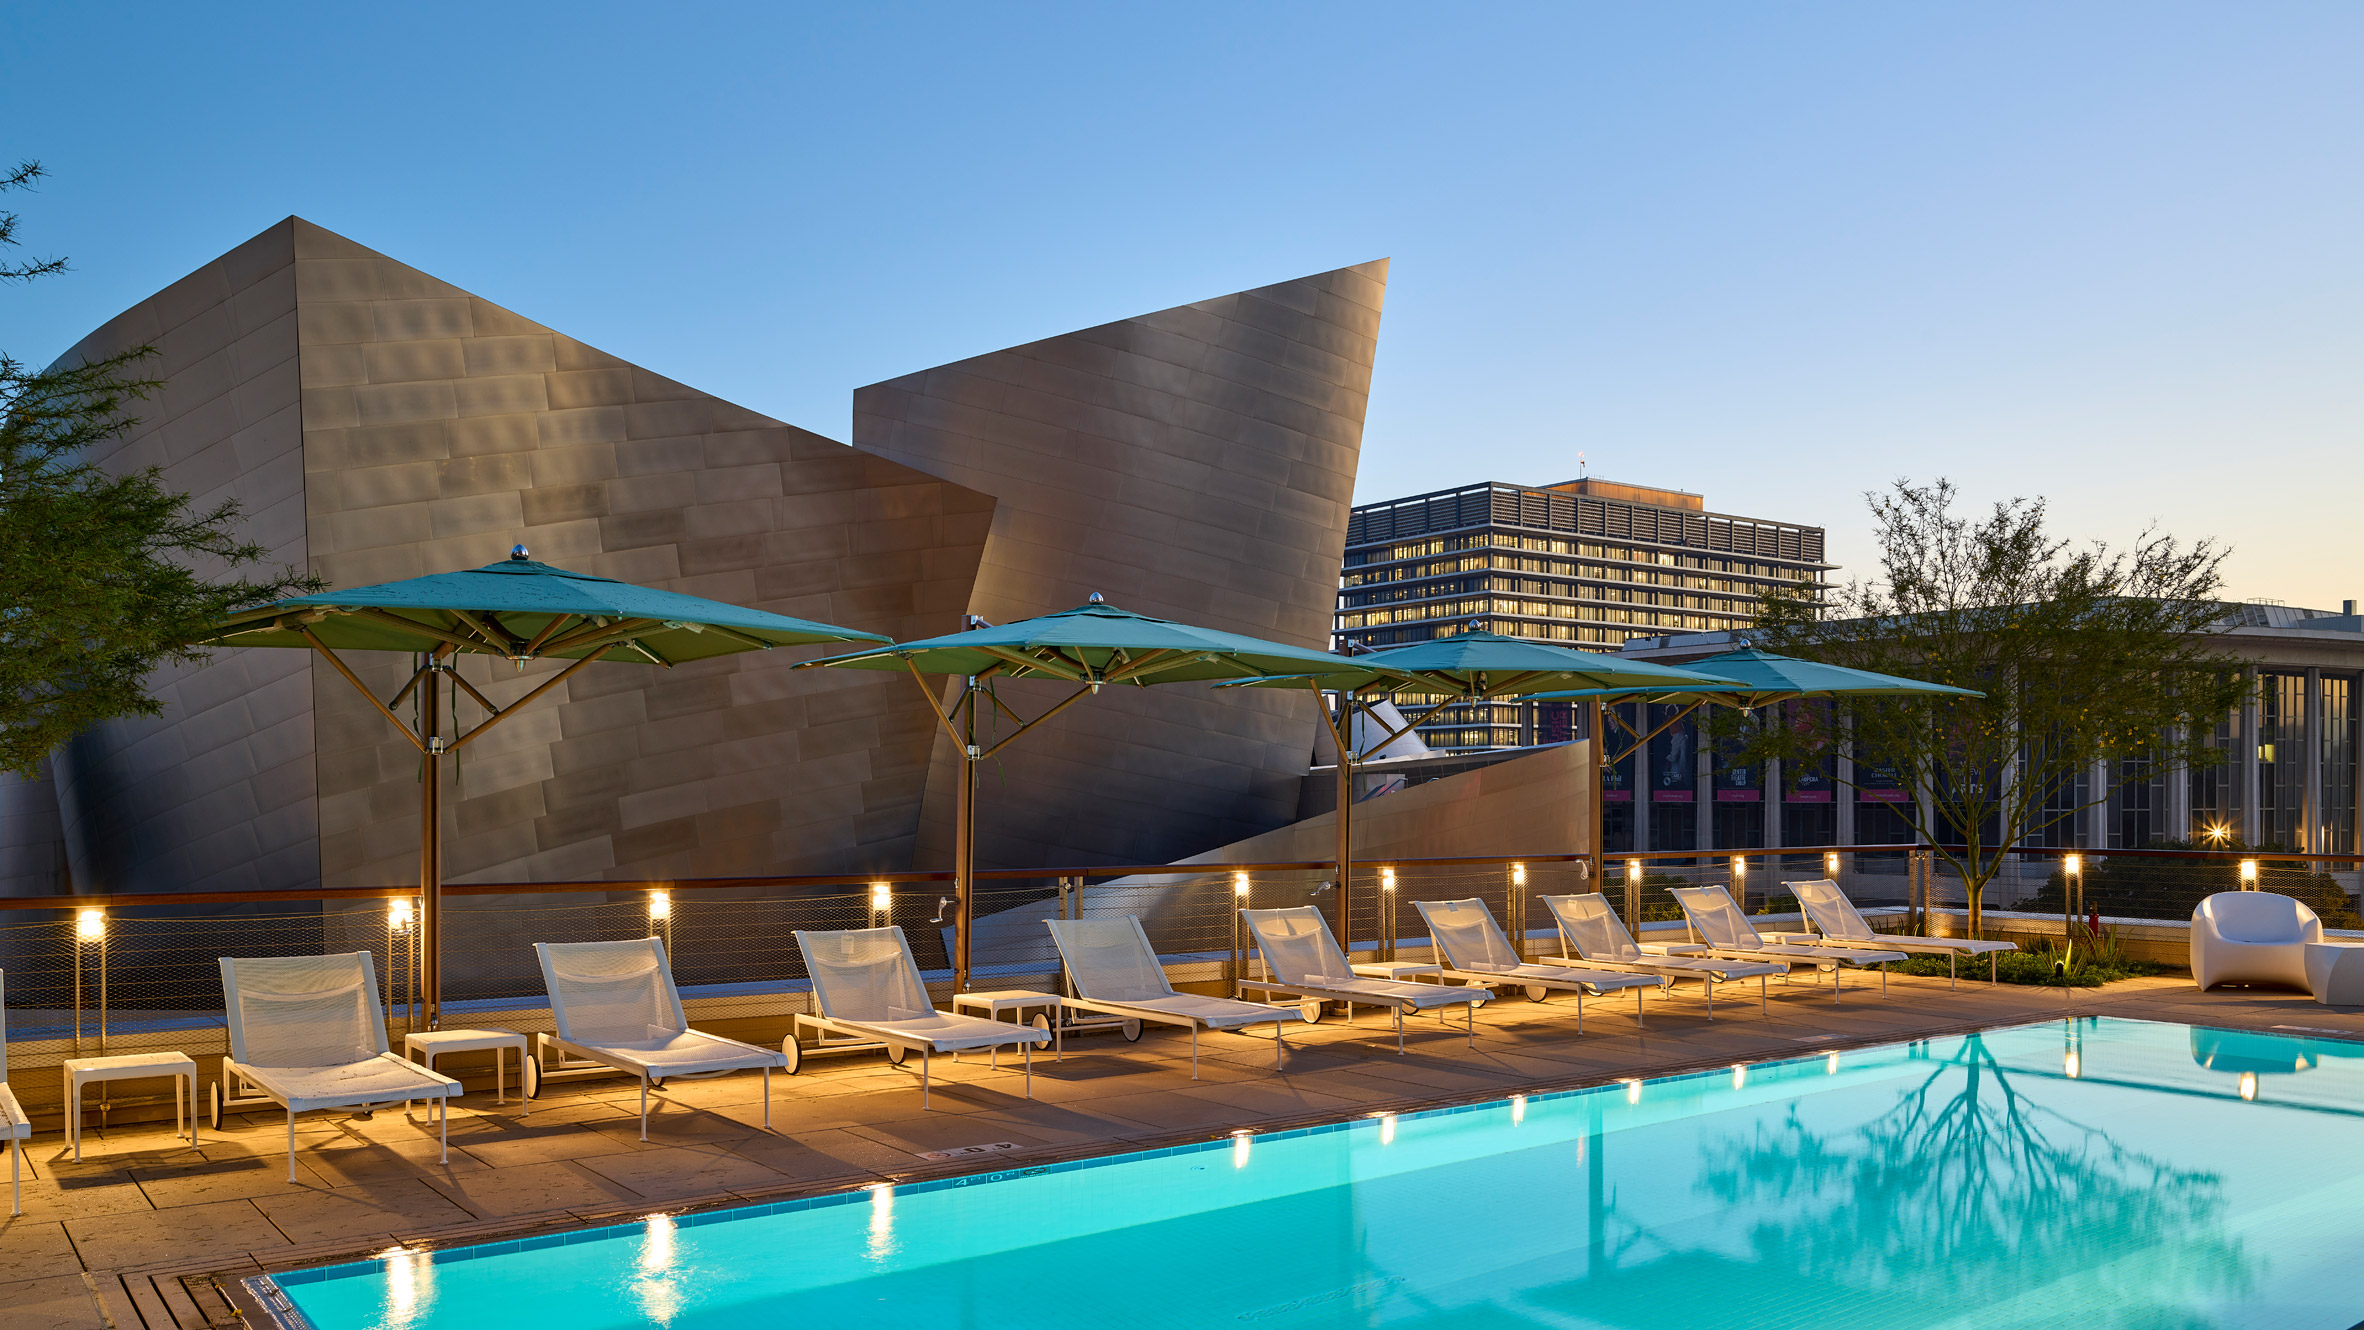 Pool with Walt Disney Concert Hall in the background